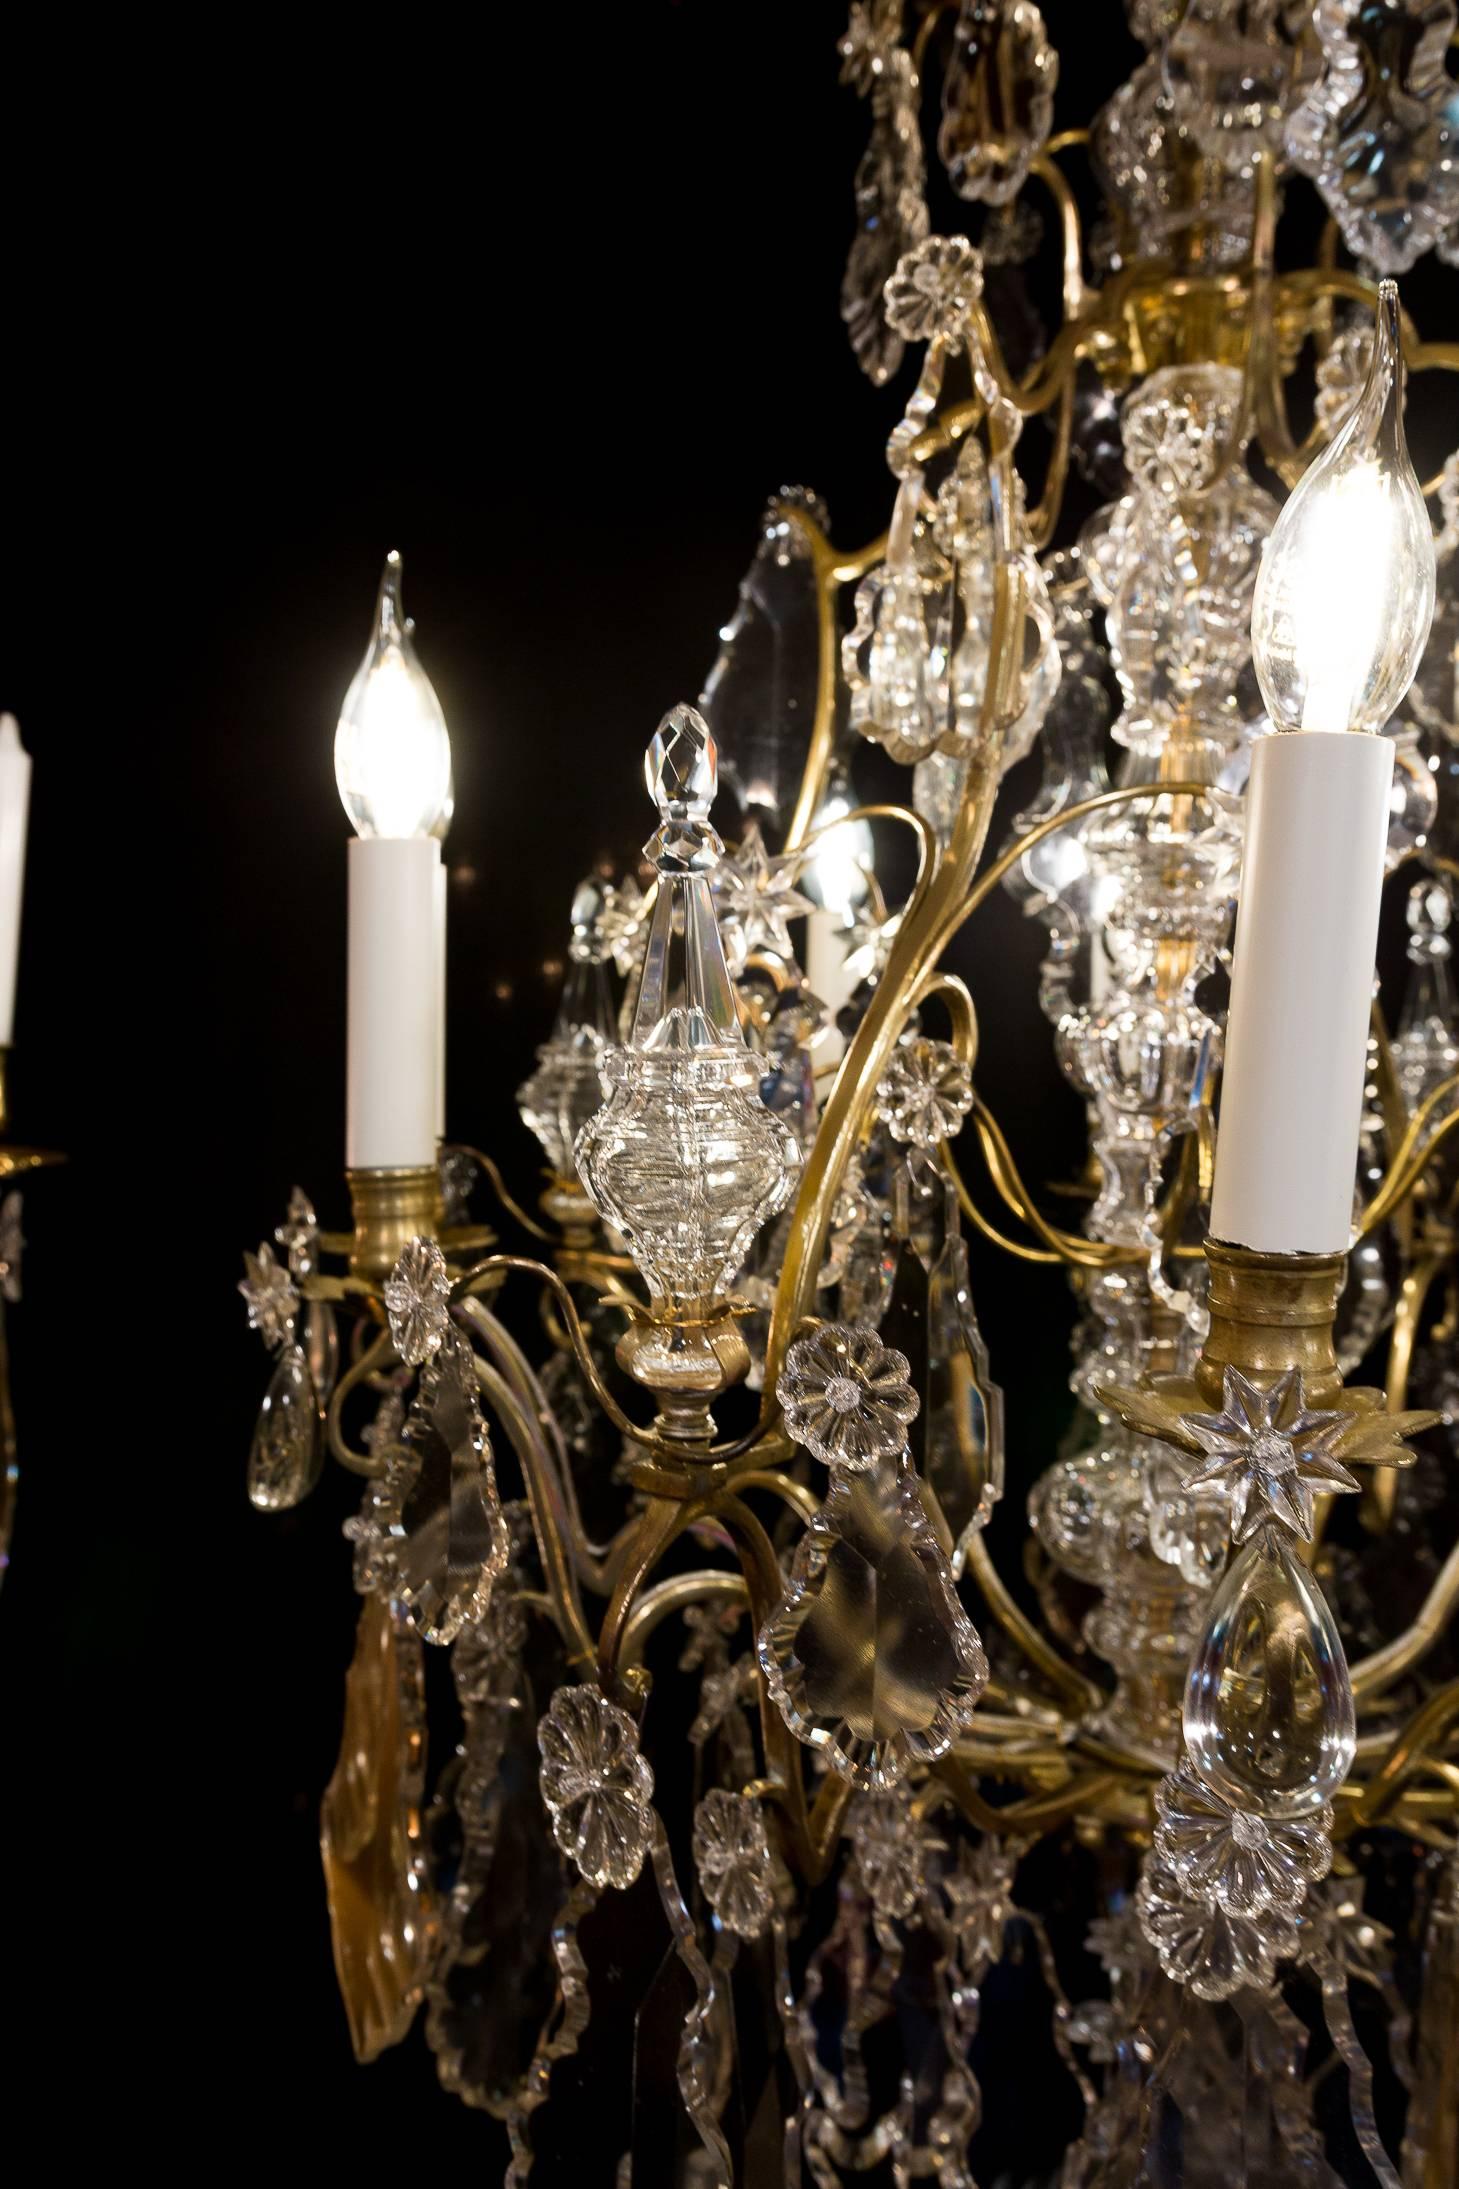 19th Century Cristalleries De Baccarat French Louis XV Style Ormolu & Crystal Chandelier 1850